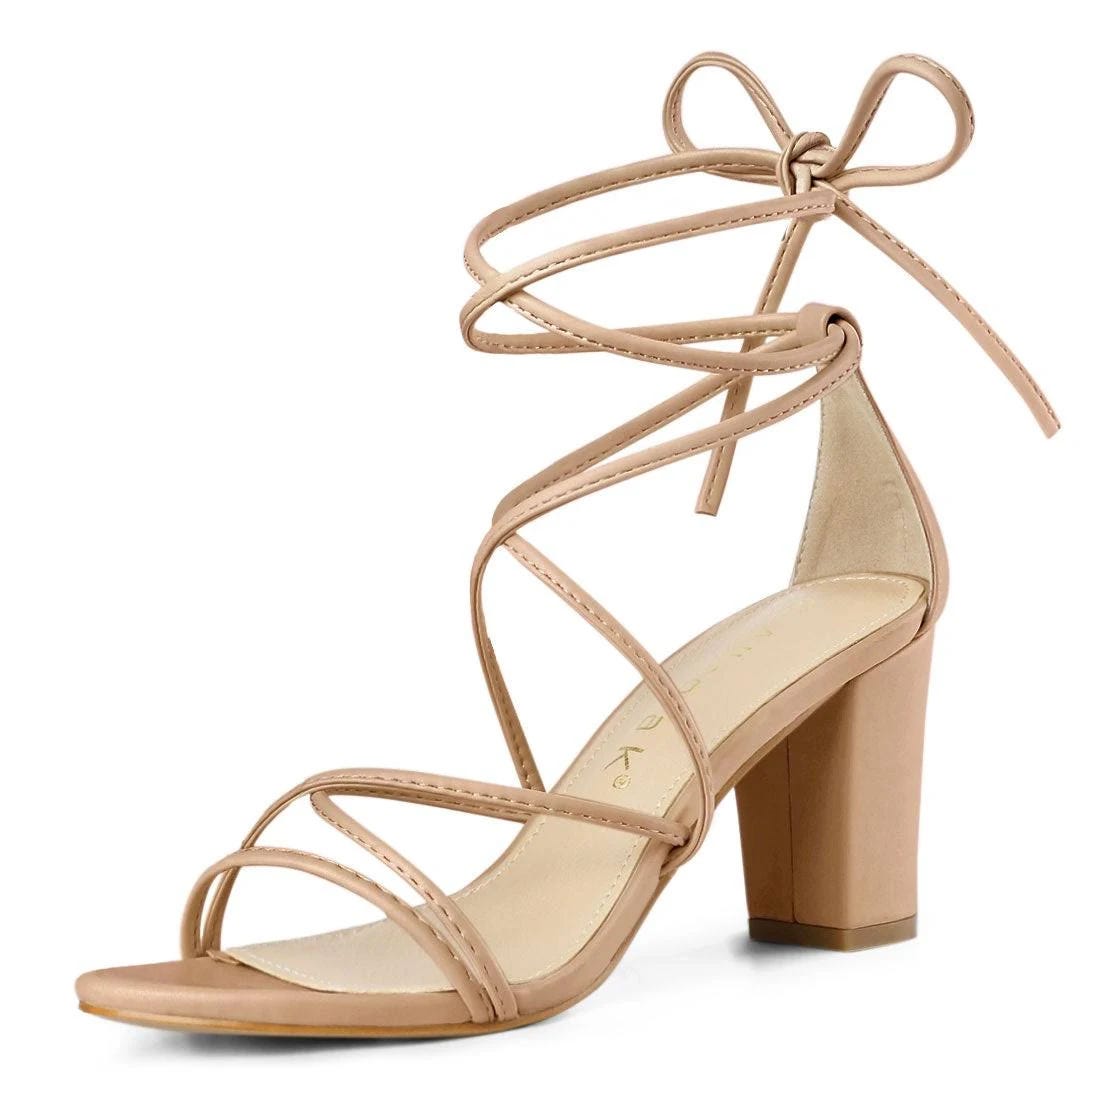 Luxurious Chunky Strappy Sandals with Covered Heel | Image